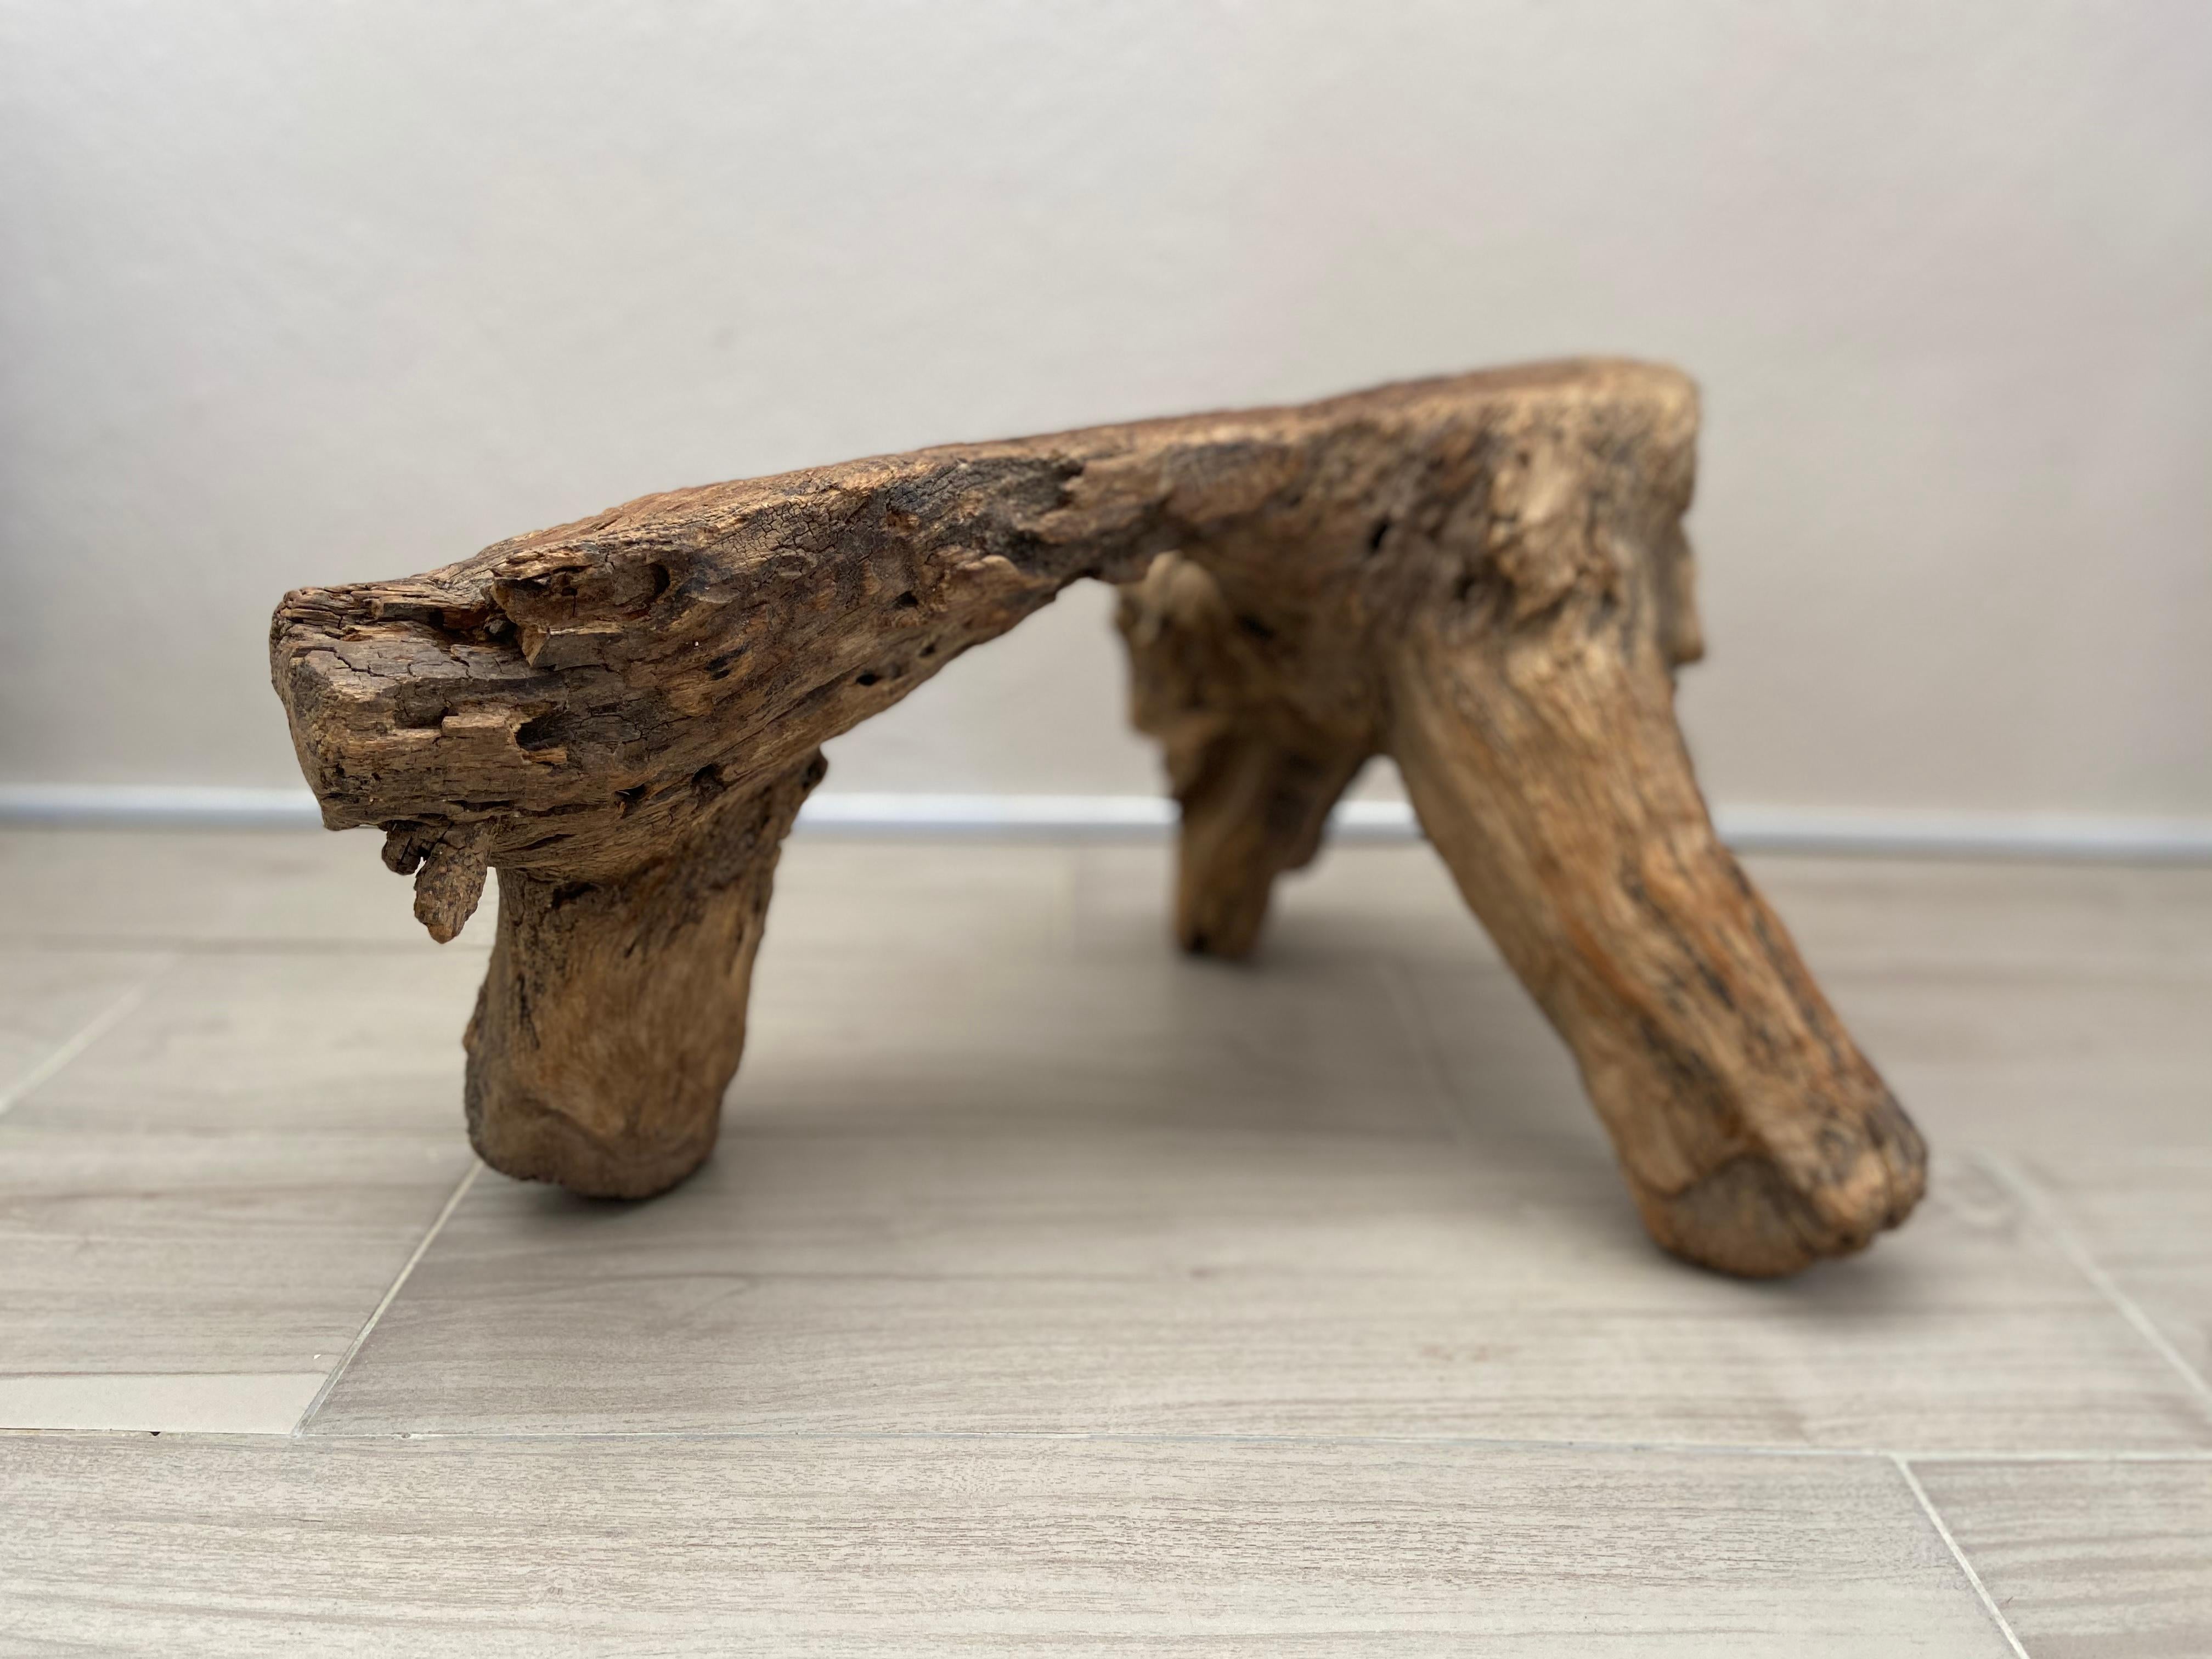 Rustic stool from San Felipe, Guanajuato, Mexico. Hand carved using mesquite hardwood.